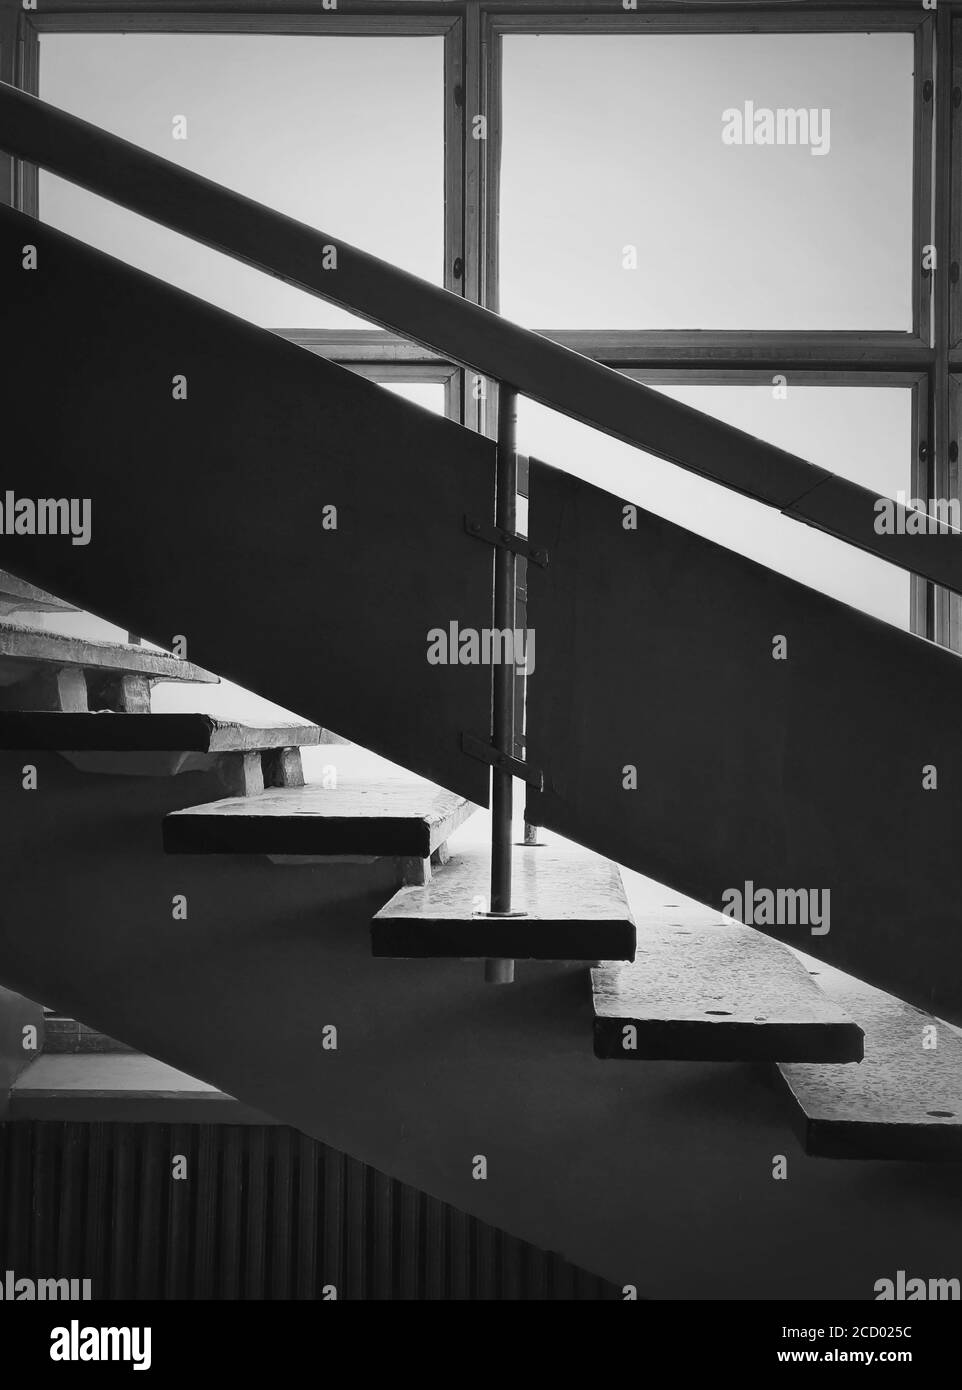 Black and white interior architecture details, old staircase by the window. Wooden railing and stone stair steps inside a shabby building. Aged constr Stock Photo